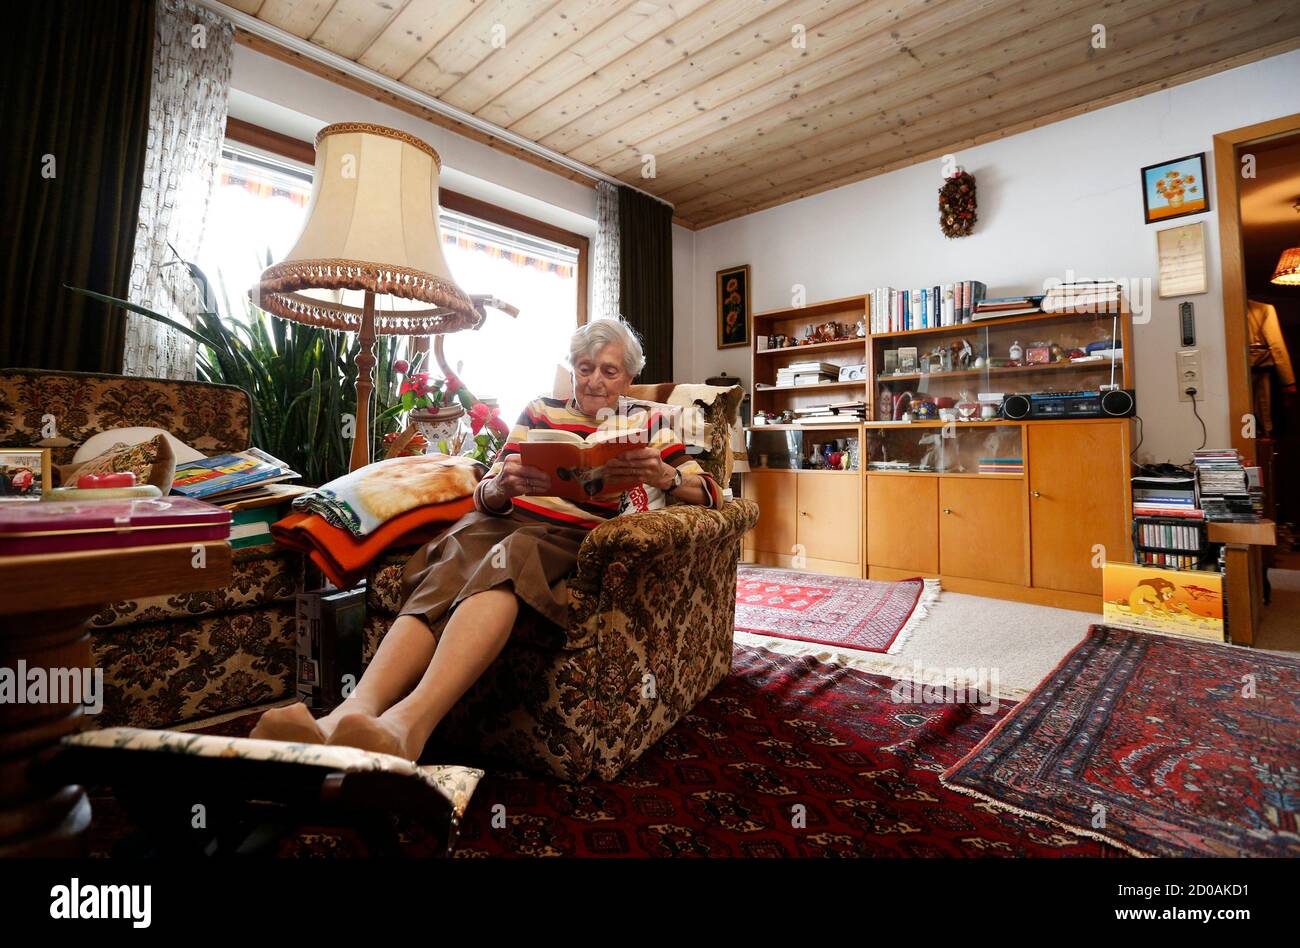 German waitress Kathi Kink, aged 91, takes a break in her home close to the  'Zum Goldenen Tal' restaurant in Naring near Weyarn, southern Germany,  February 2, 2015. Since 1939 at the